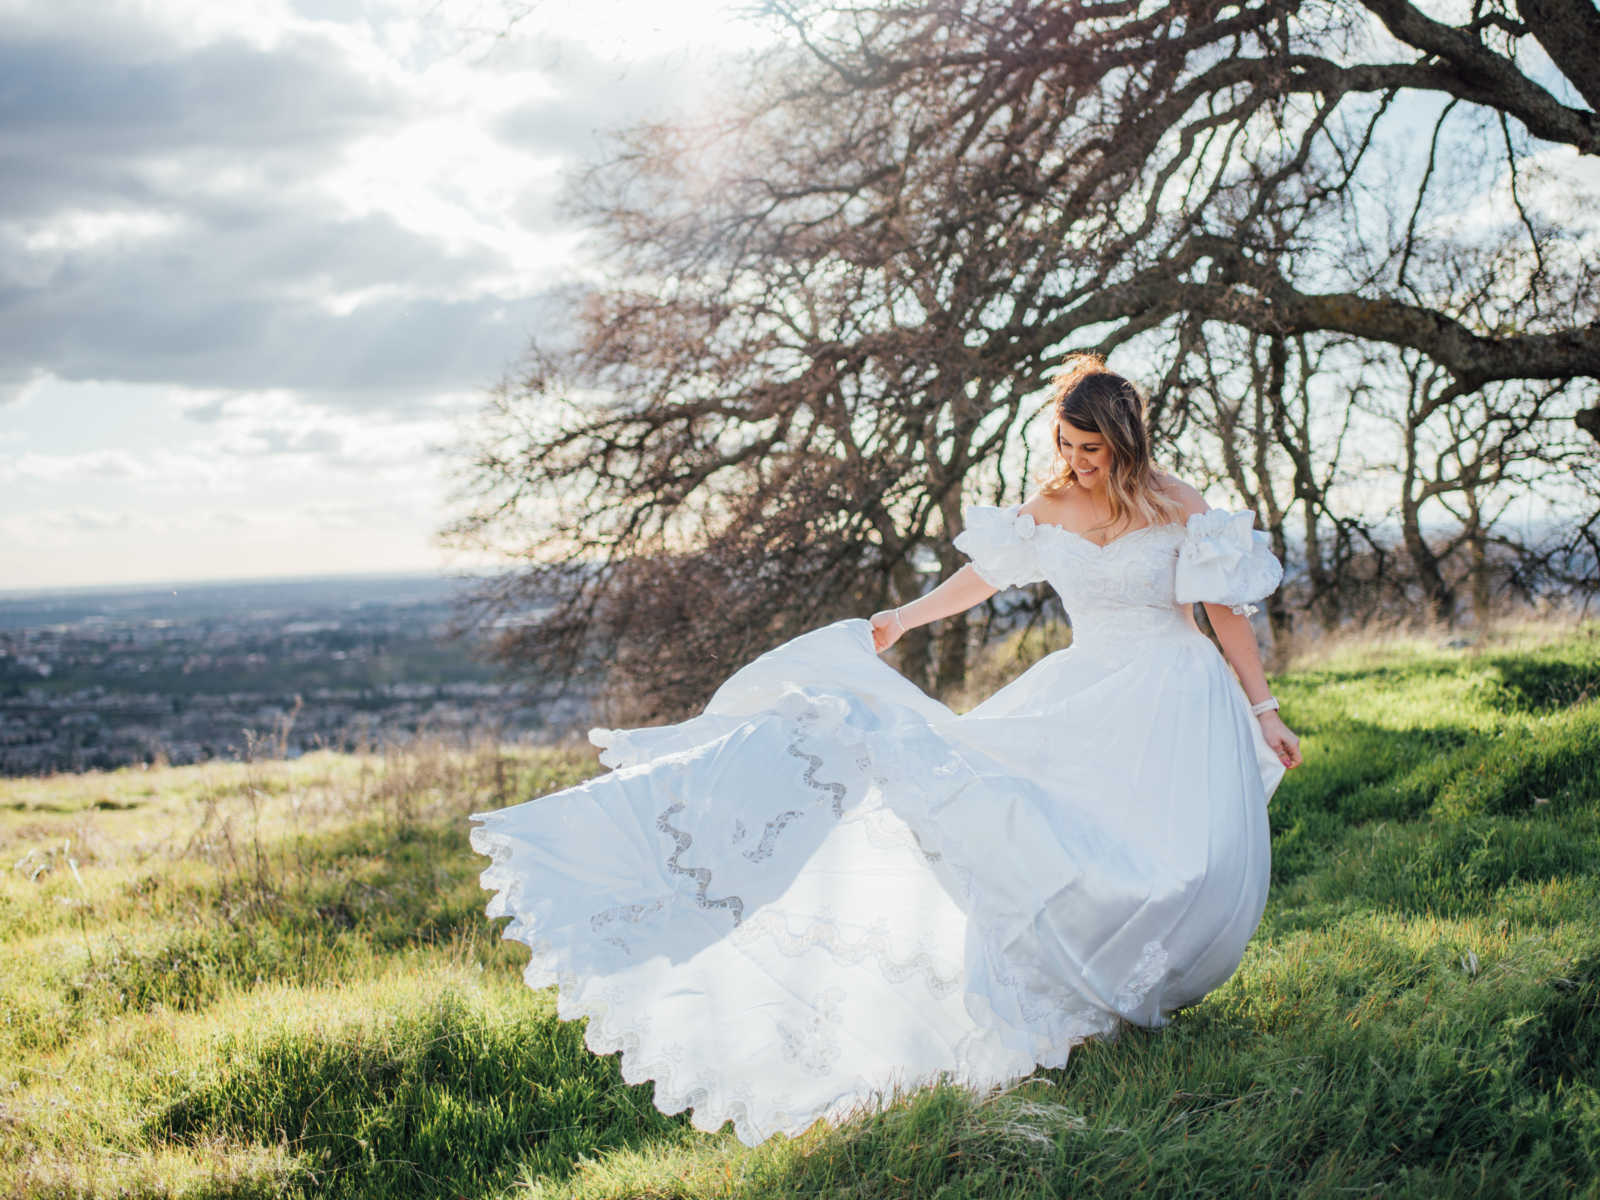 Daughter looks down smiling while holding out skirt of late mothers wedding dress in field